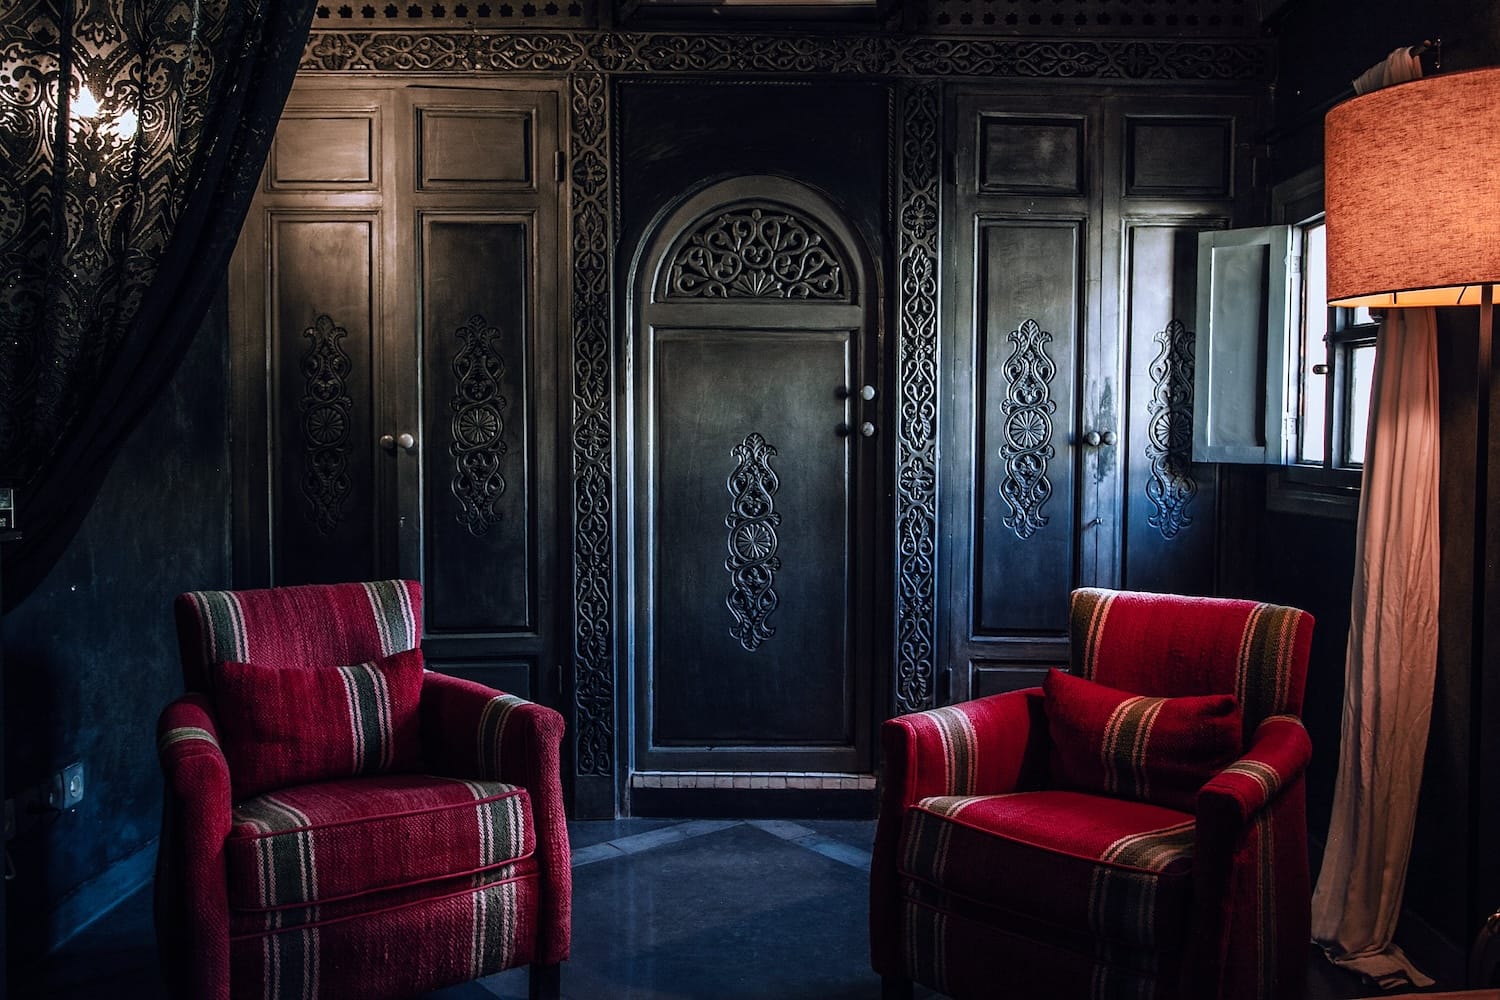 Black, ornate closet with red armchairs and a lamp